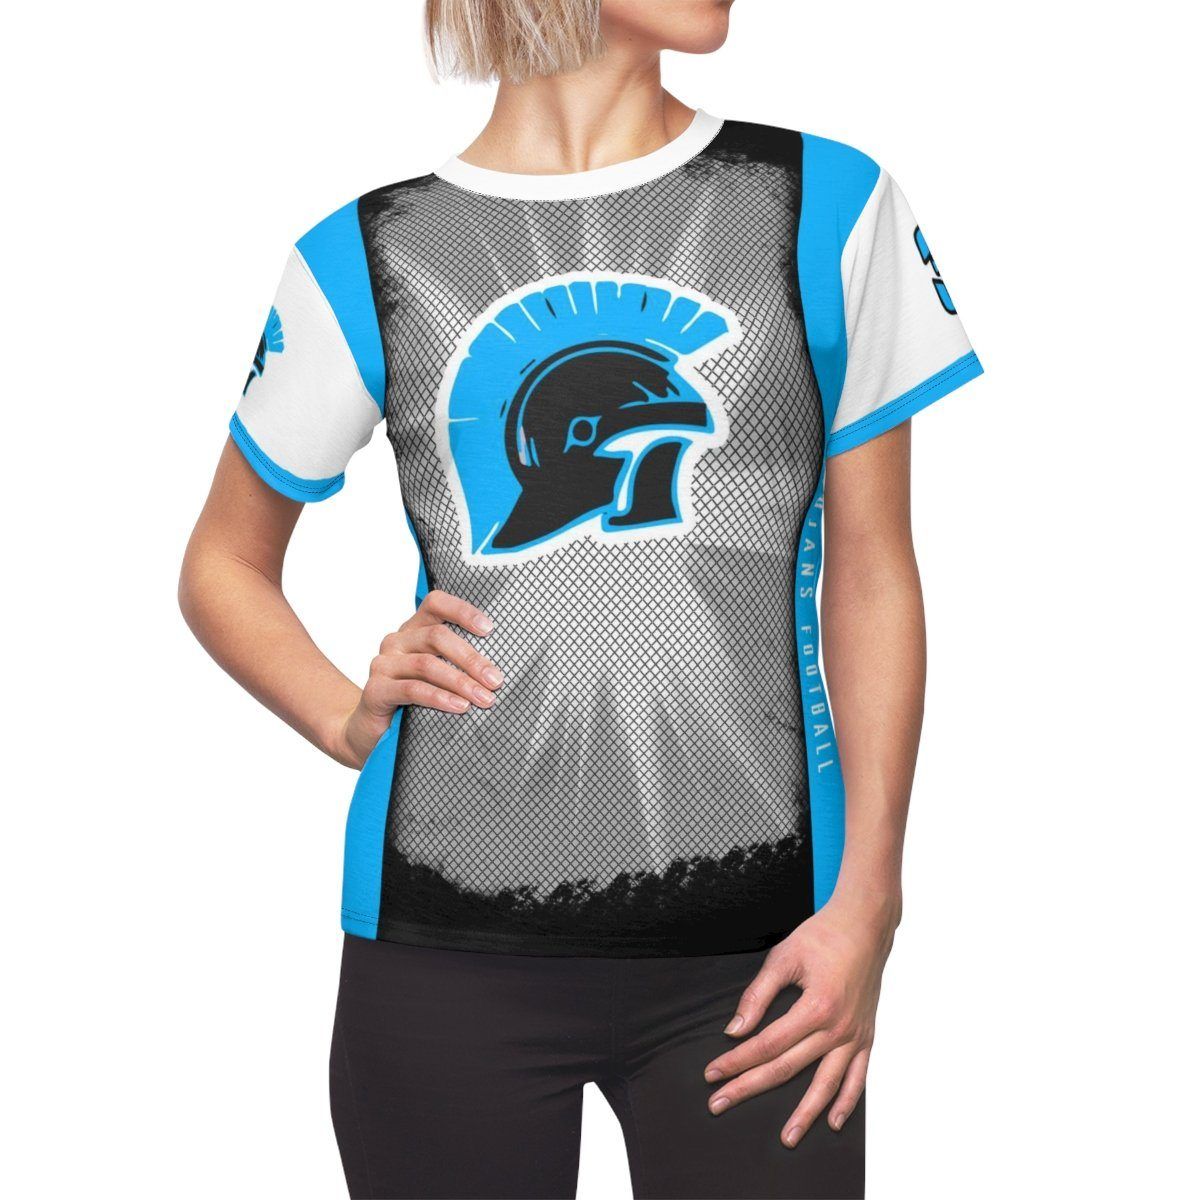 Grill - V.4 - Extreme Sportswear Women's Cut & Sew Template-Photoshop Template - PSMGraphix